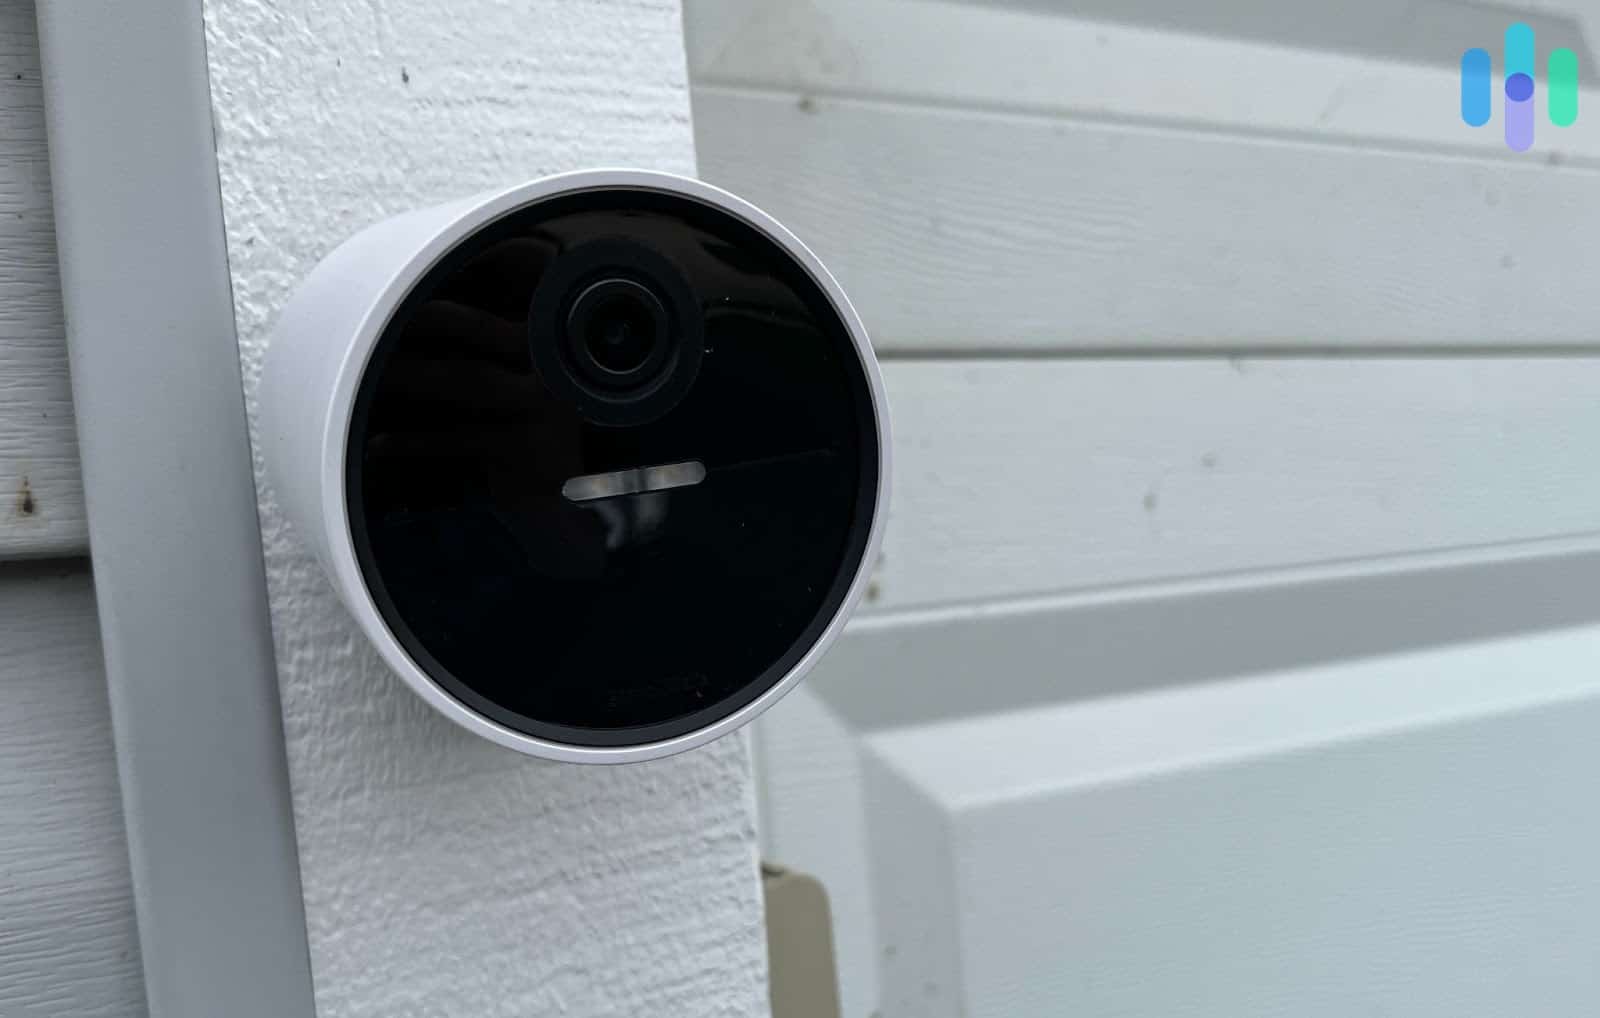 The new SimpliSafe Outdoor Camera mounted outside our home